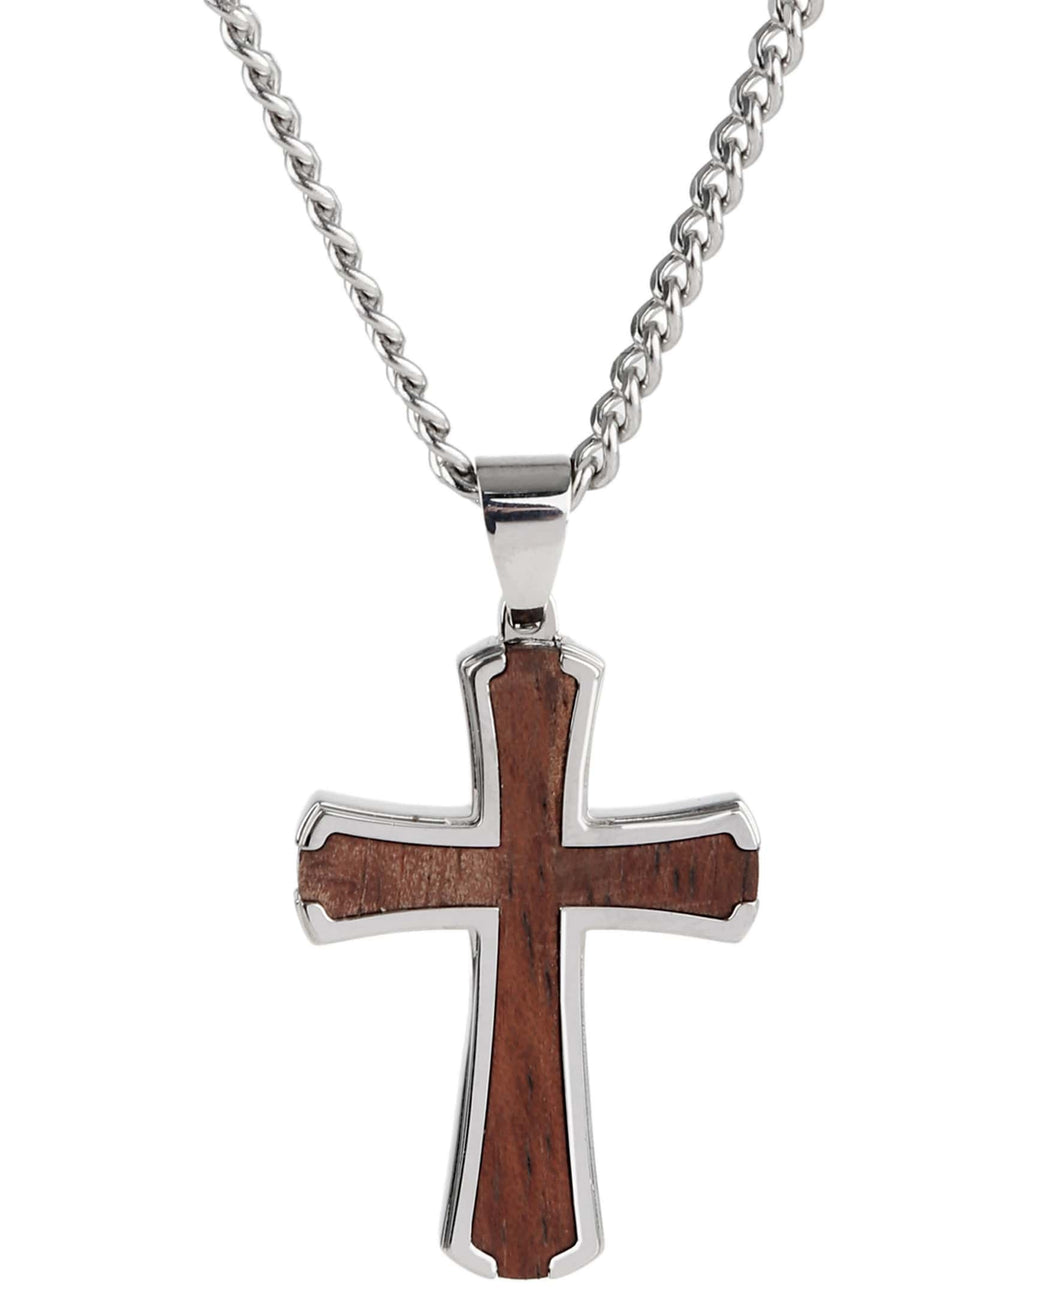 Sutton Stainless Steel Wood Inset Cross Pendant Necklace